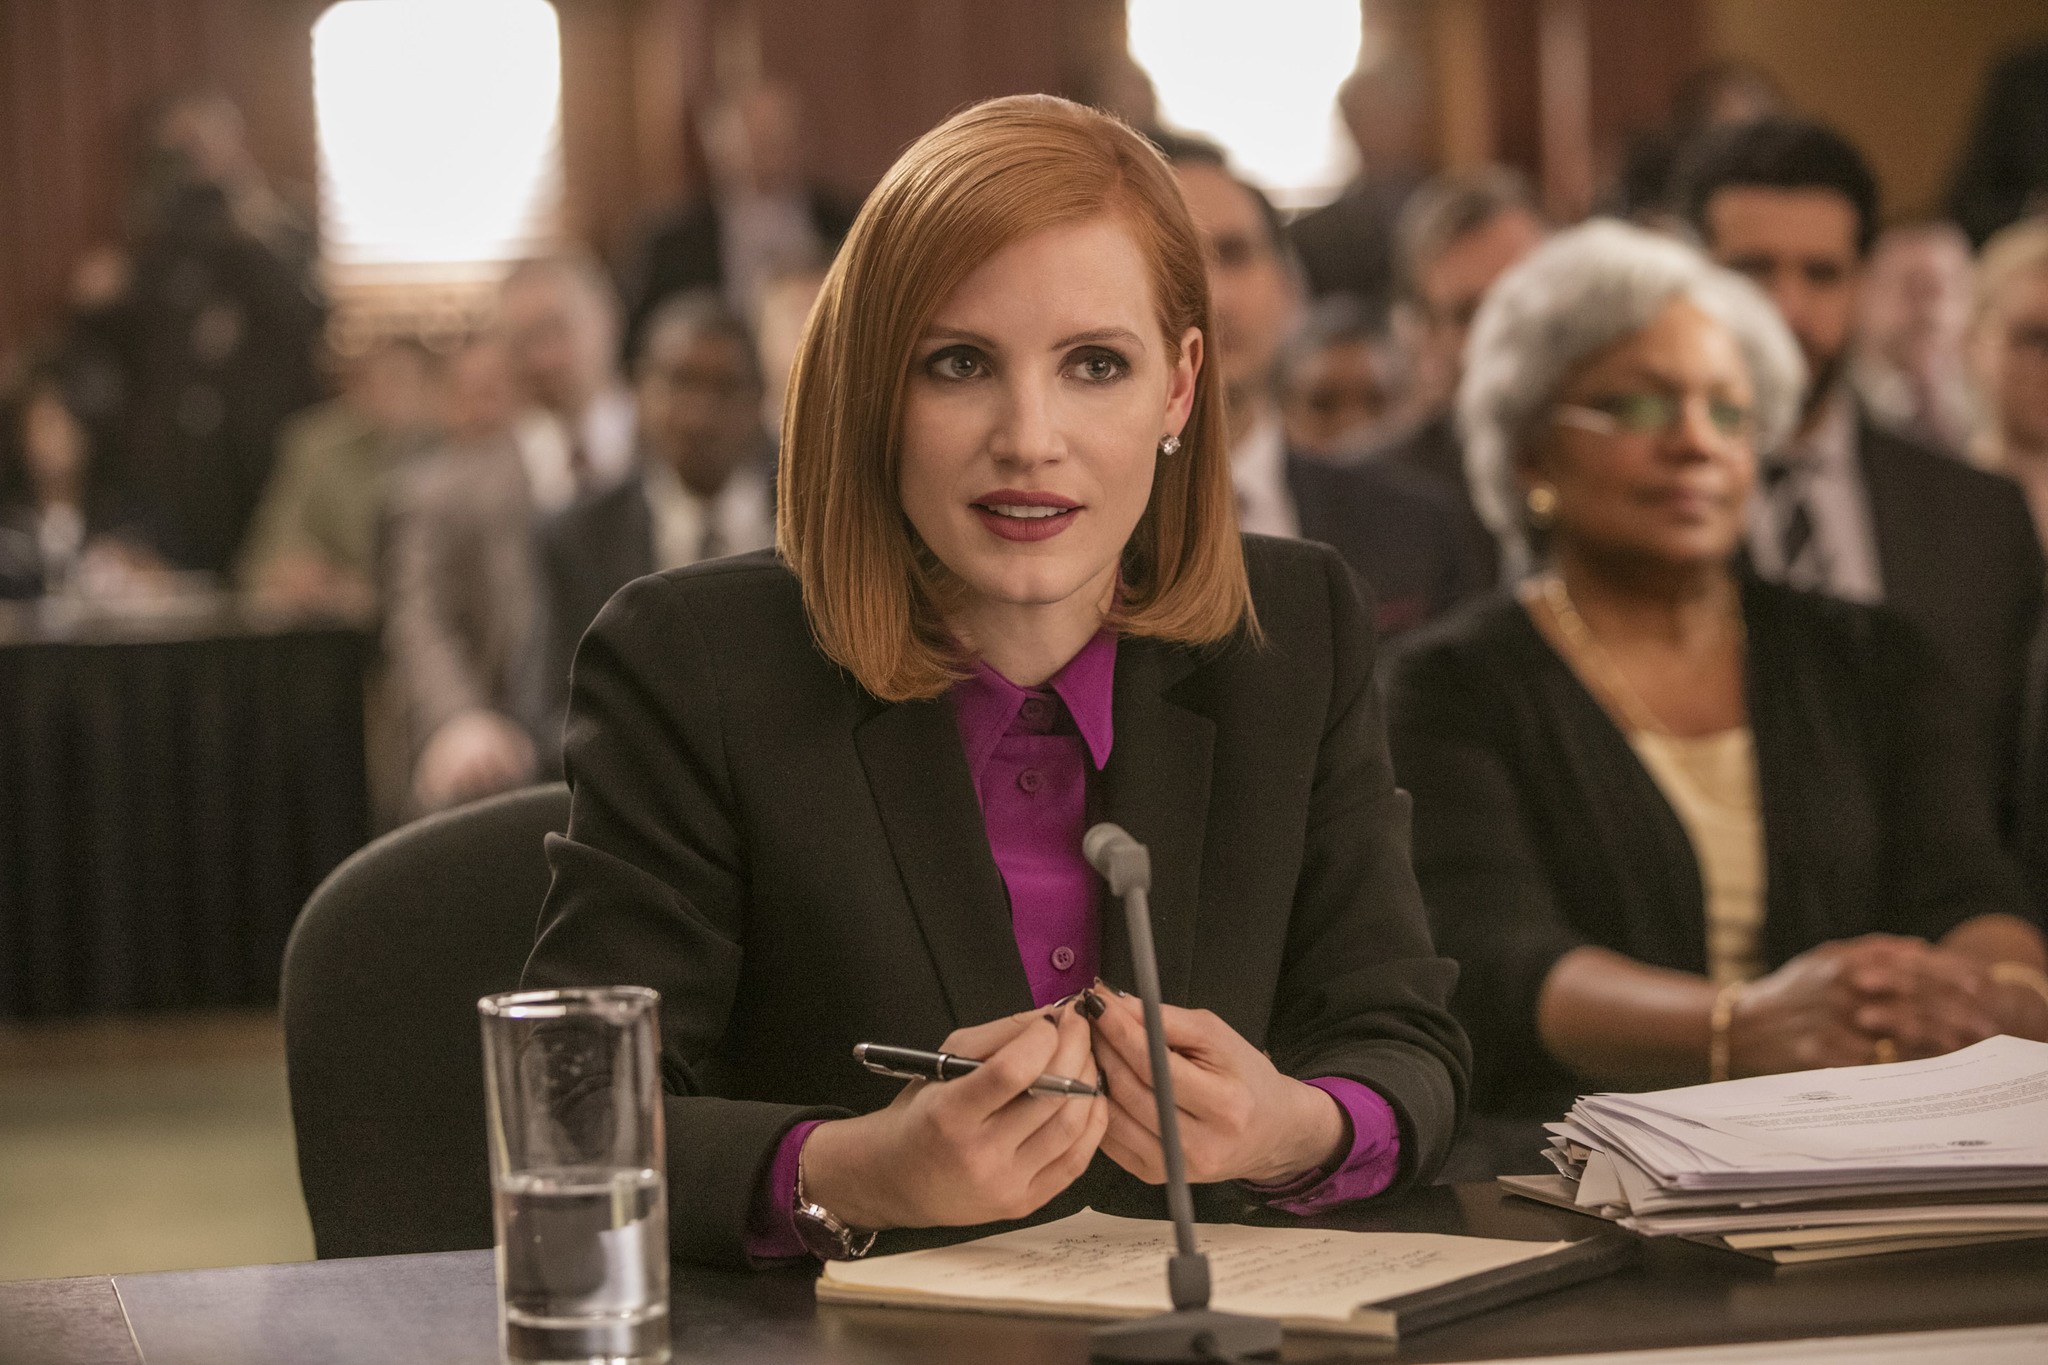 A Ruthless Lobbyist Takes on Gun Control in the Farfetched But Satisfying ‘Miss Sloane’